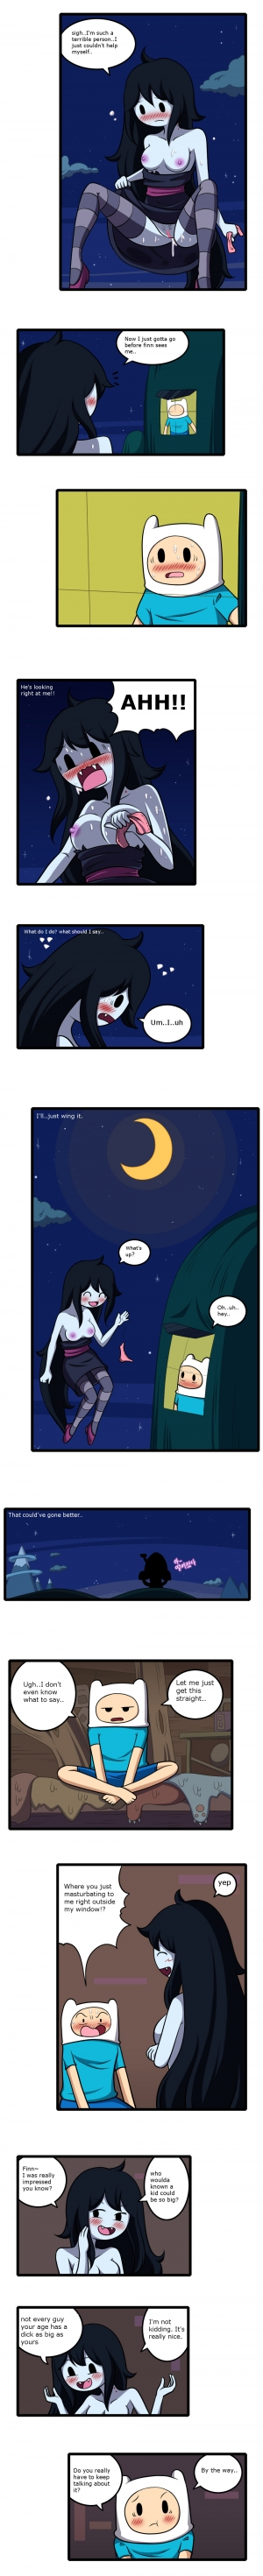 [WB] Adult Time 4 (Adventure Time) (English) [incomplete] - Page 4